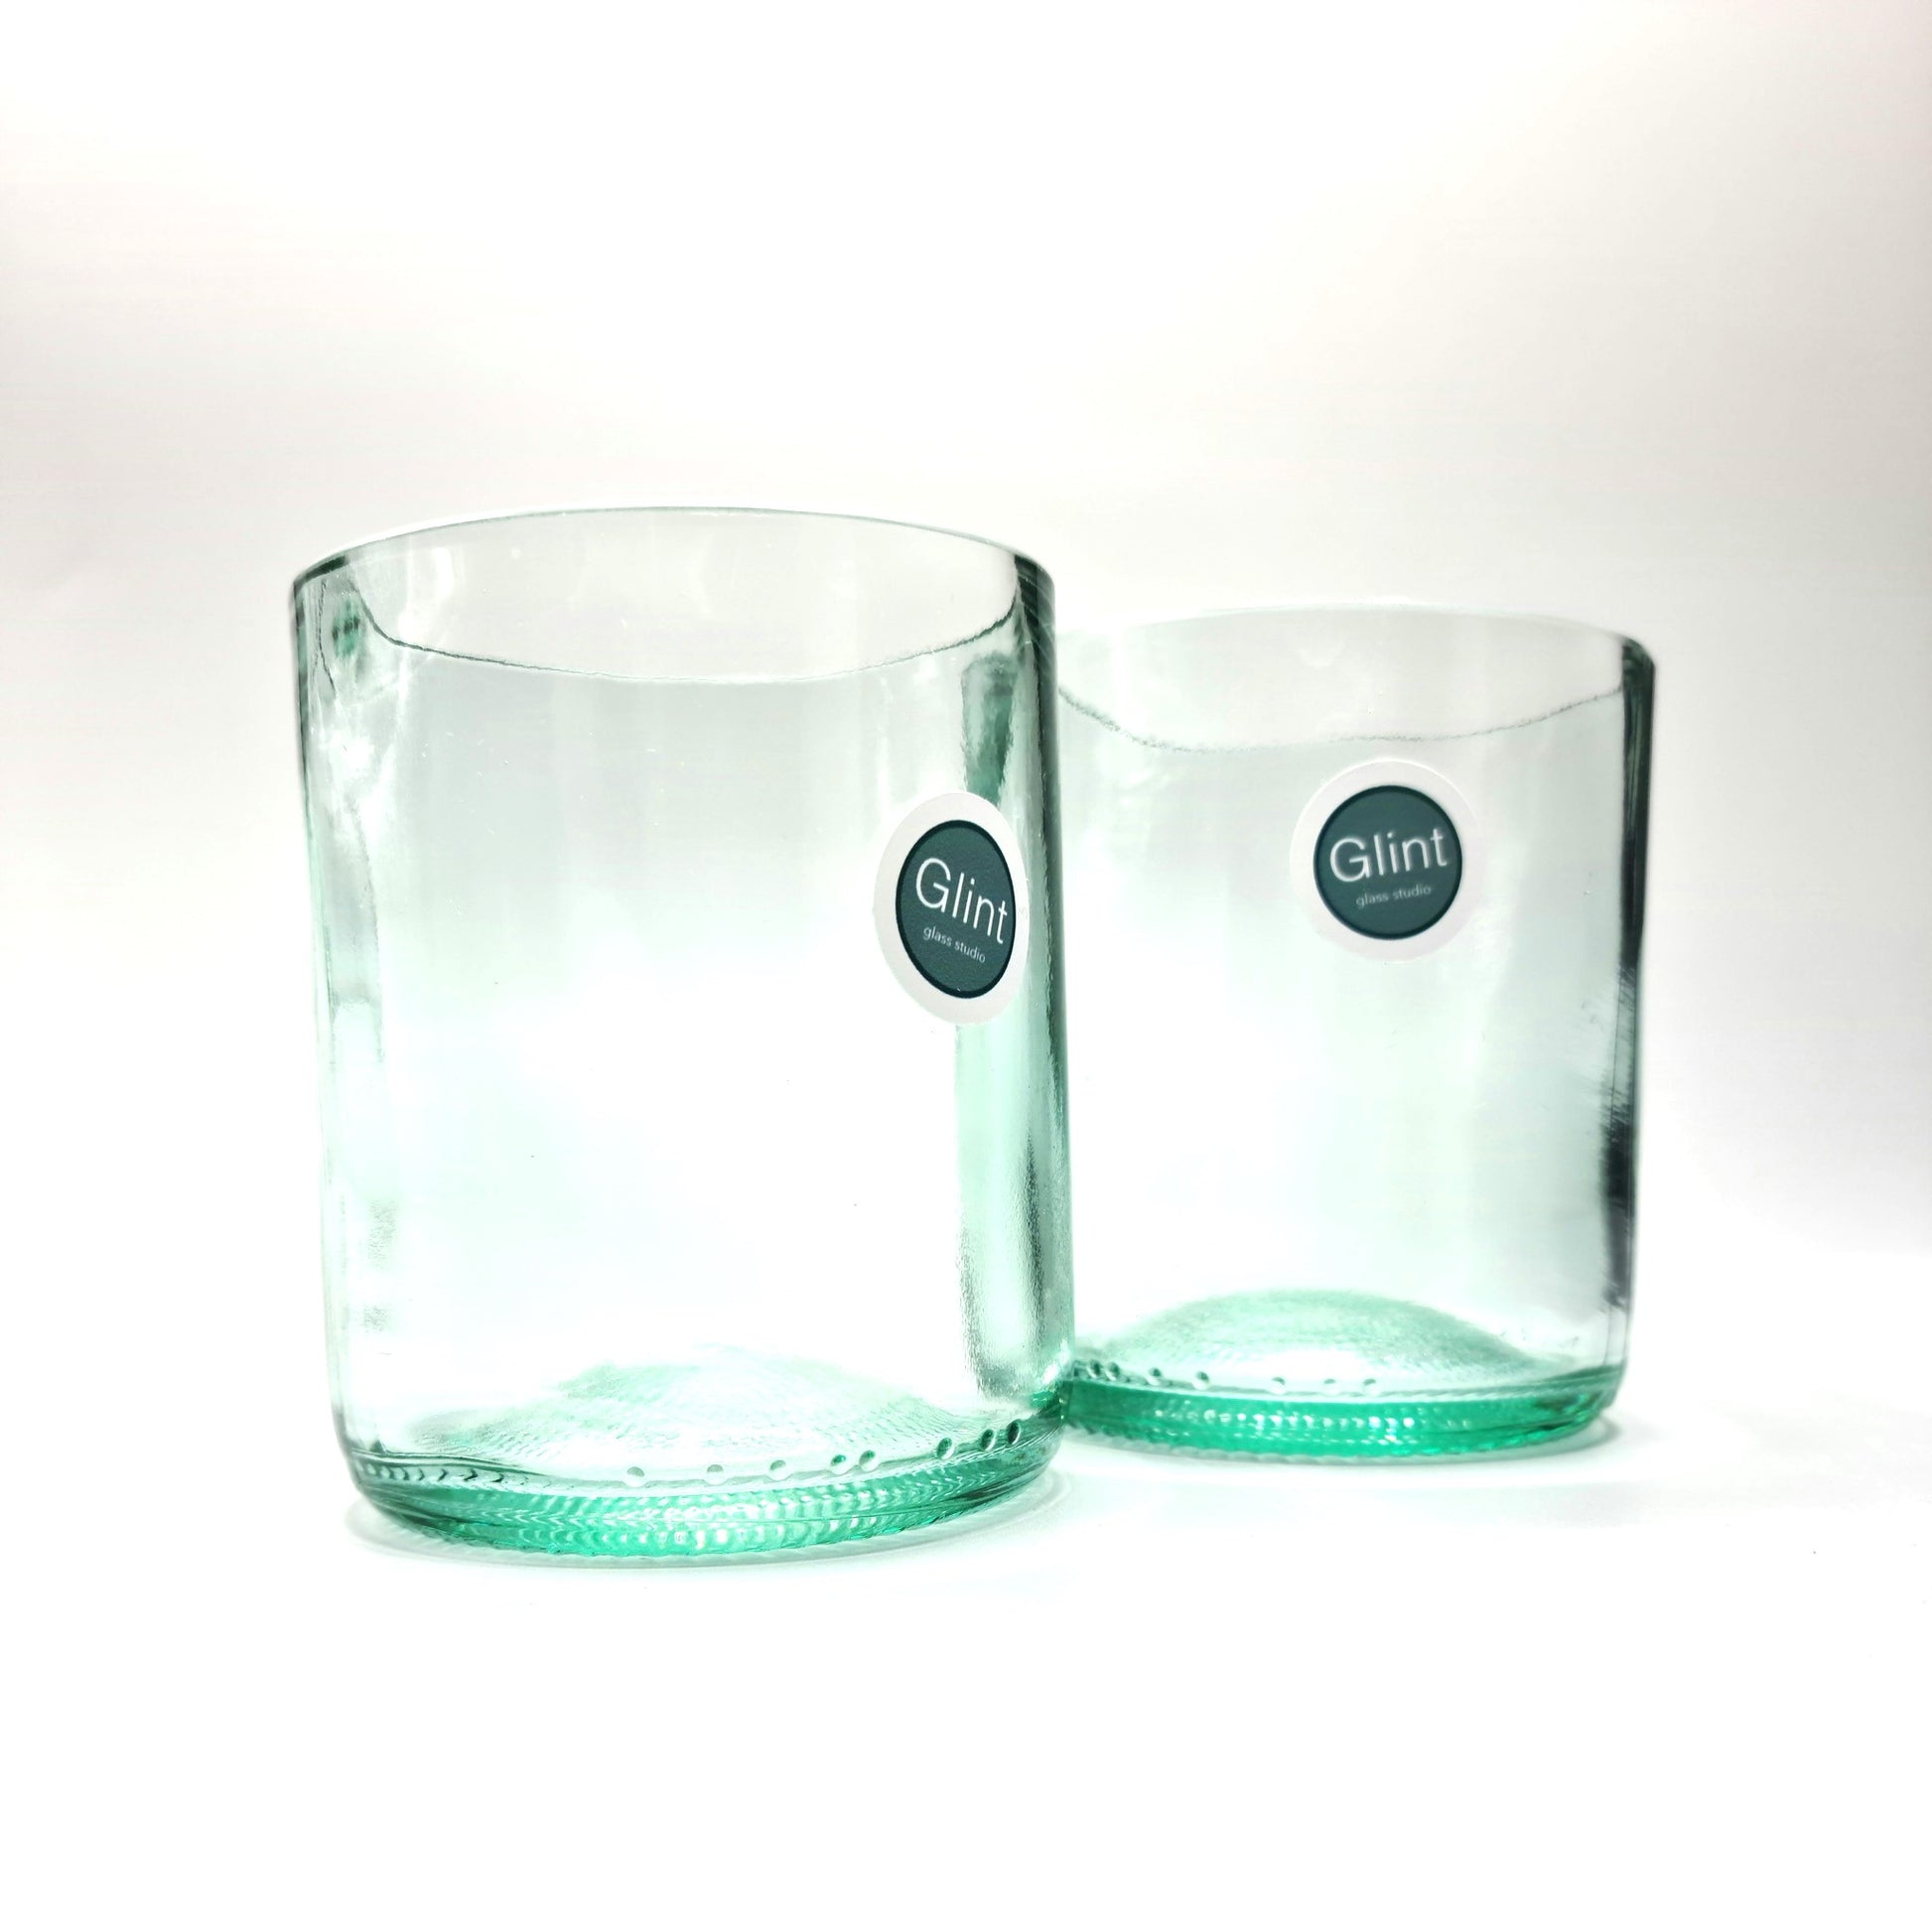 Two recycled glass tumblers